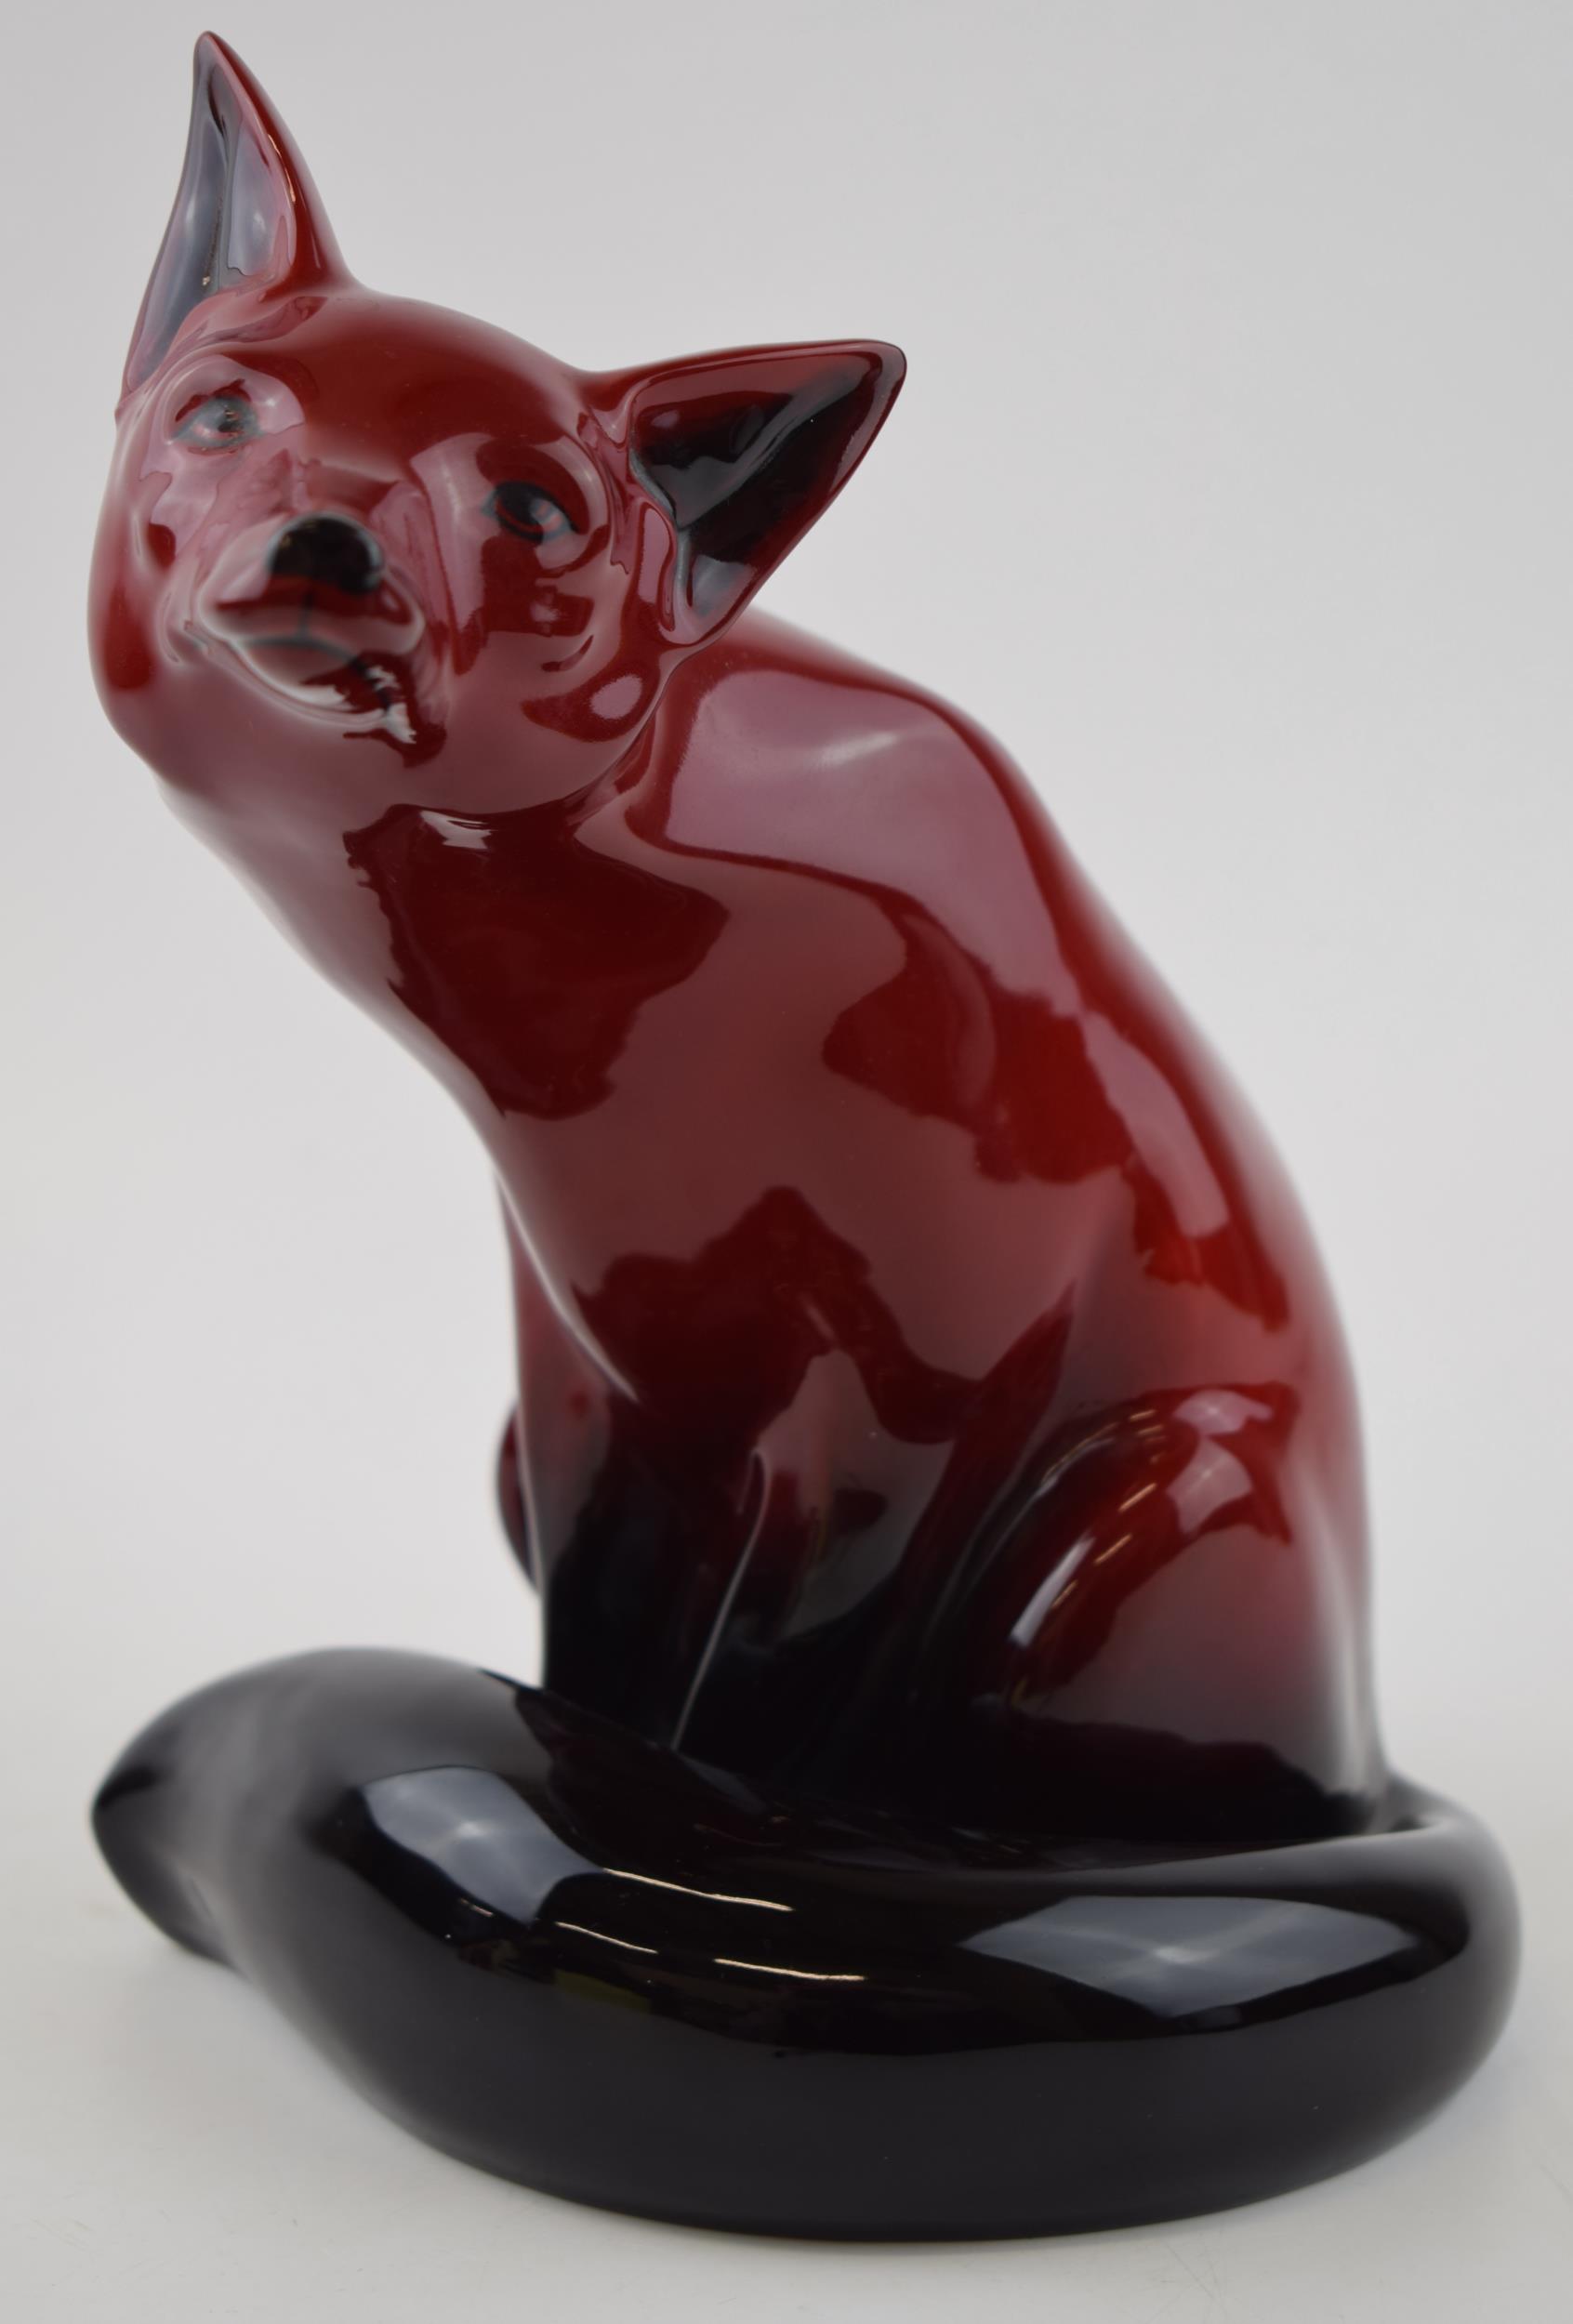 Large Royal Doulton Flambe Fox, height 23cm. In good condition with no obvious damage or - Image 2 of 4